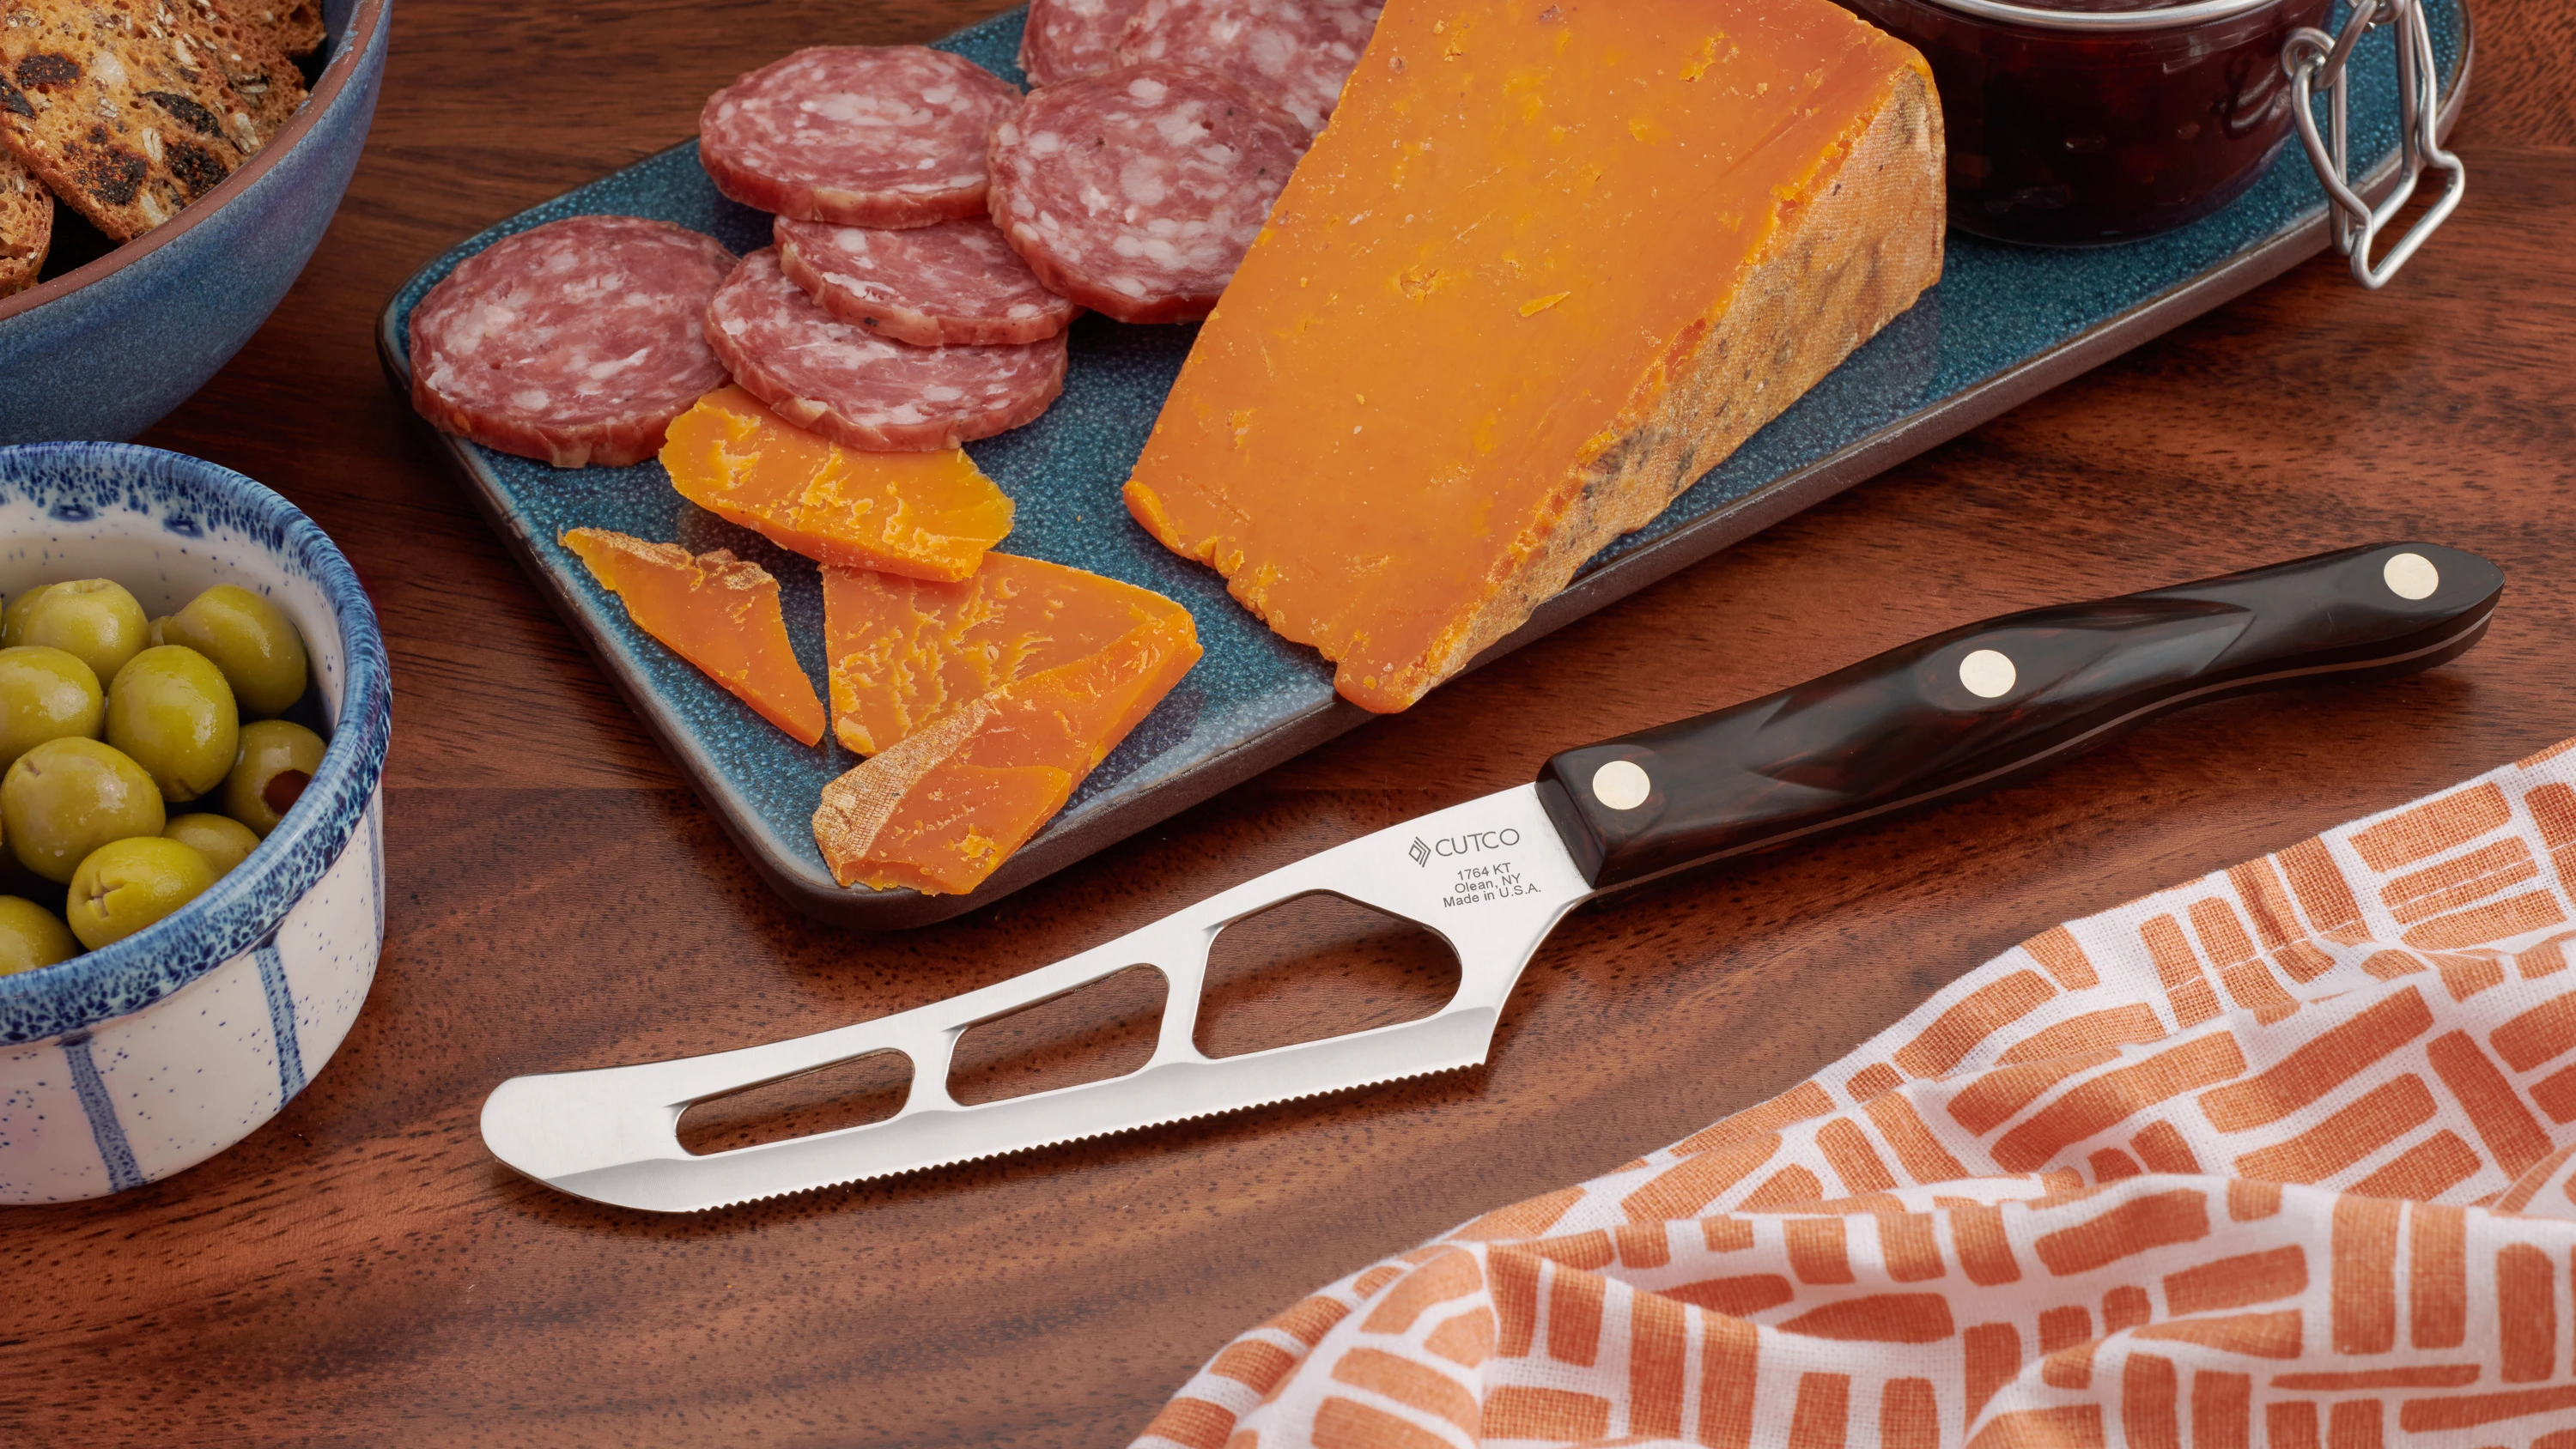 Cutco Petite Chef Knife Review: A sharp knife that's comfortable to hold